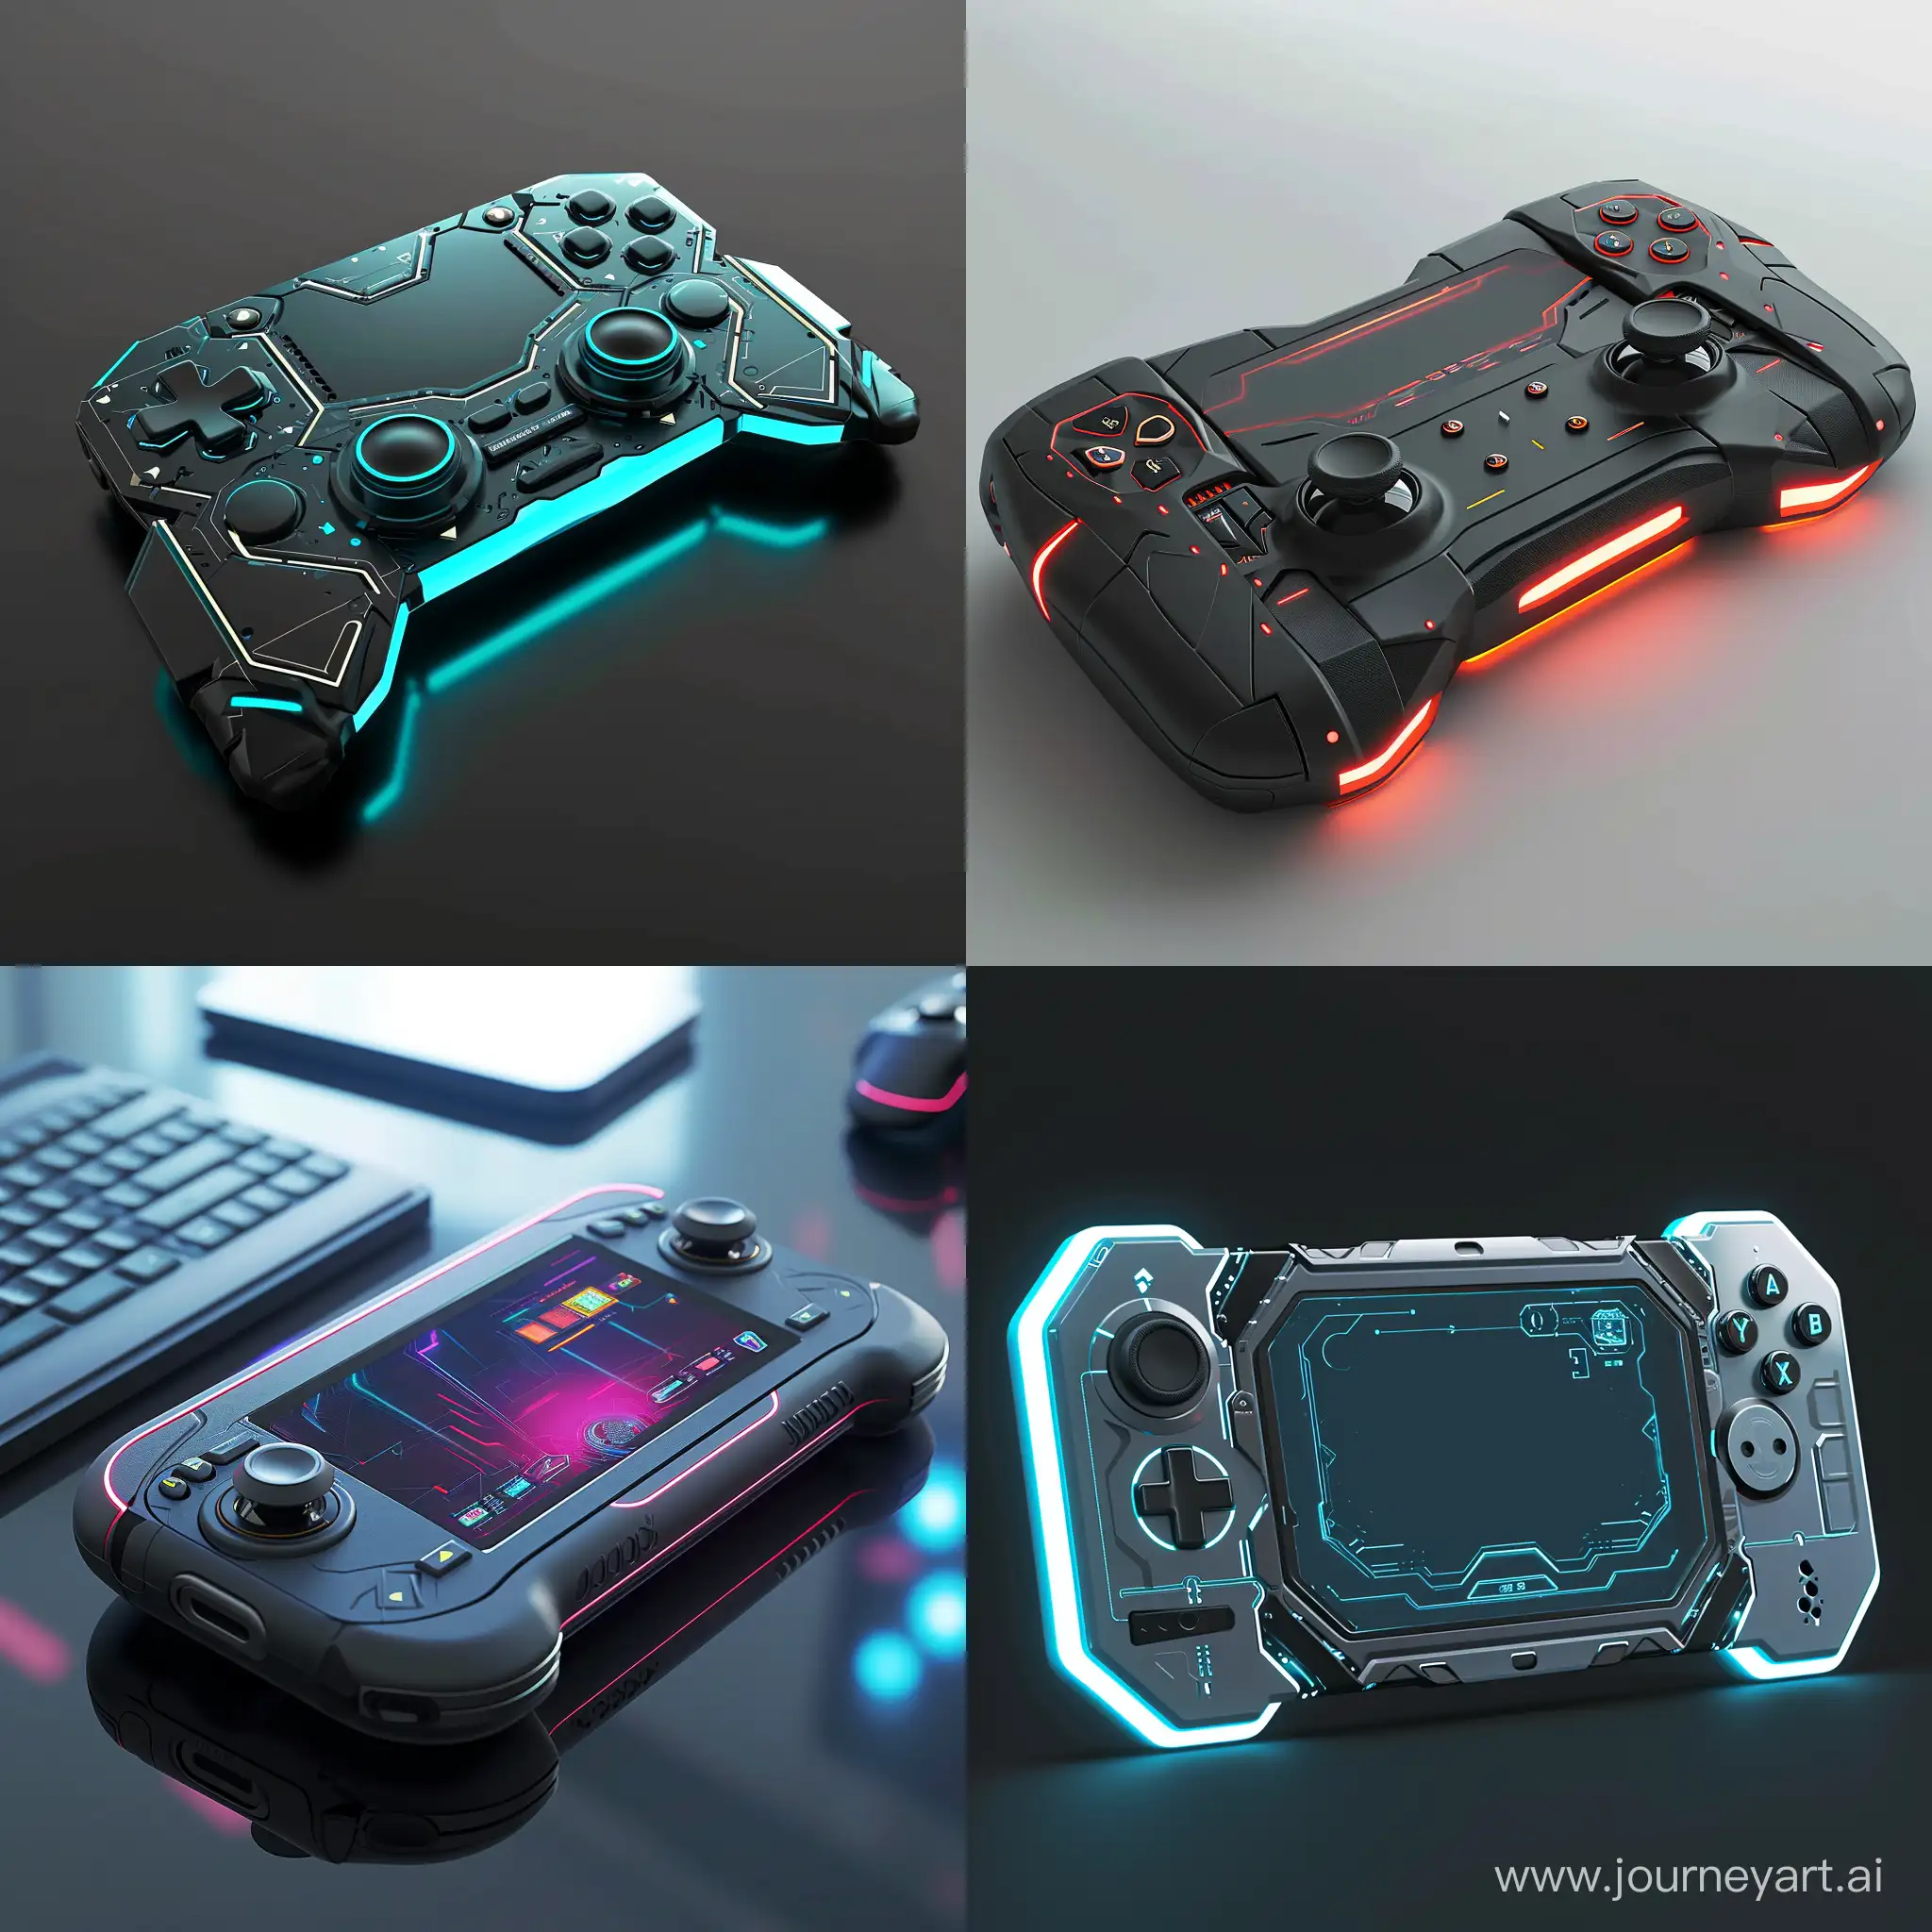 CuttingEdge-11-Aspect-Ratio-Portable-Gaming-Console-with-Smart-Materials